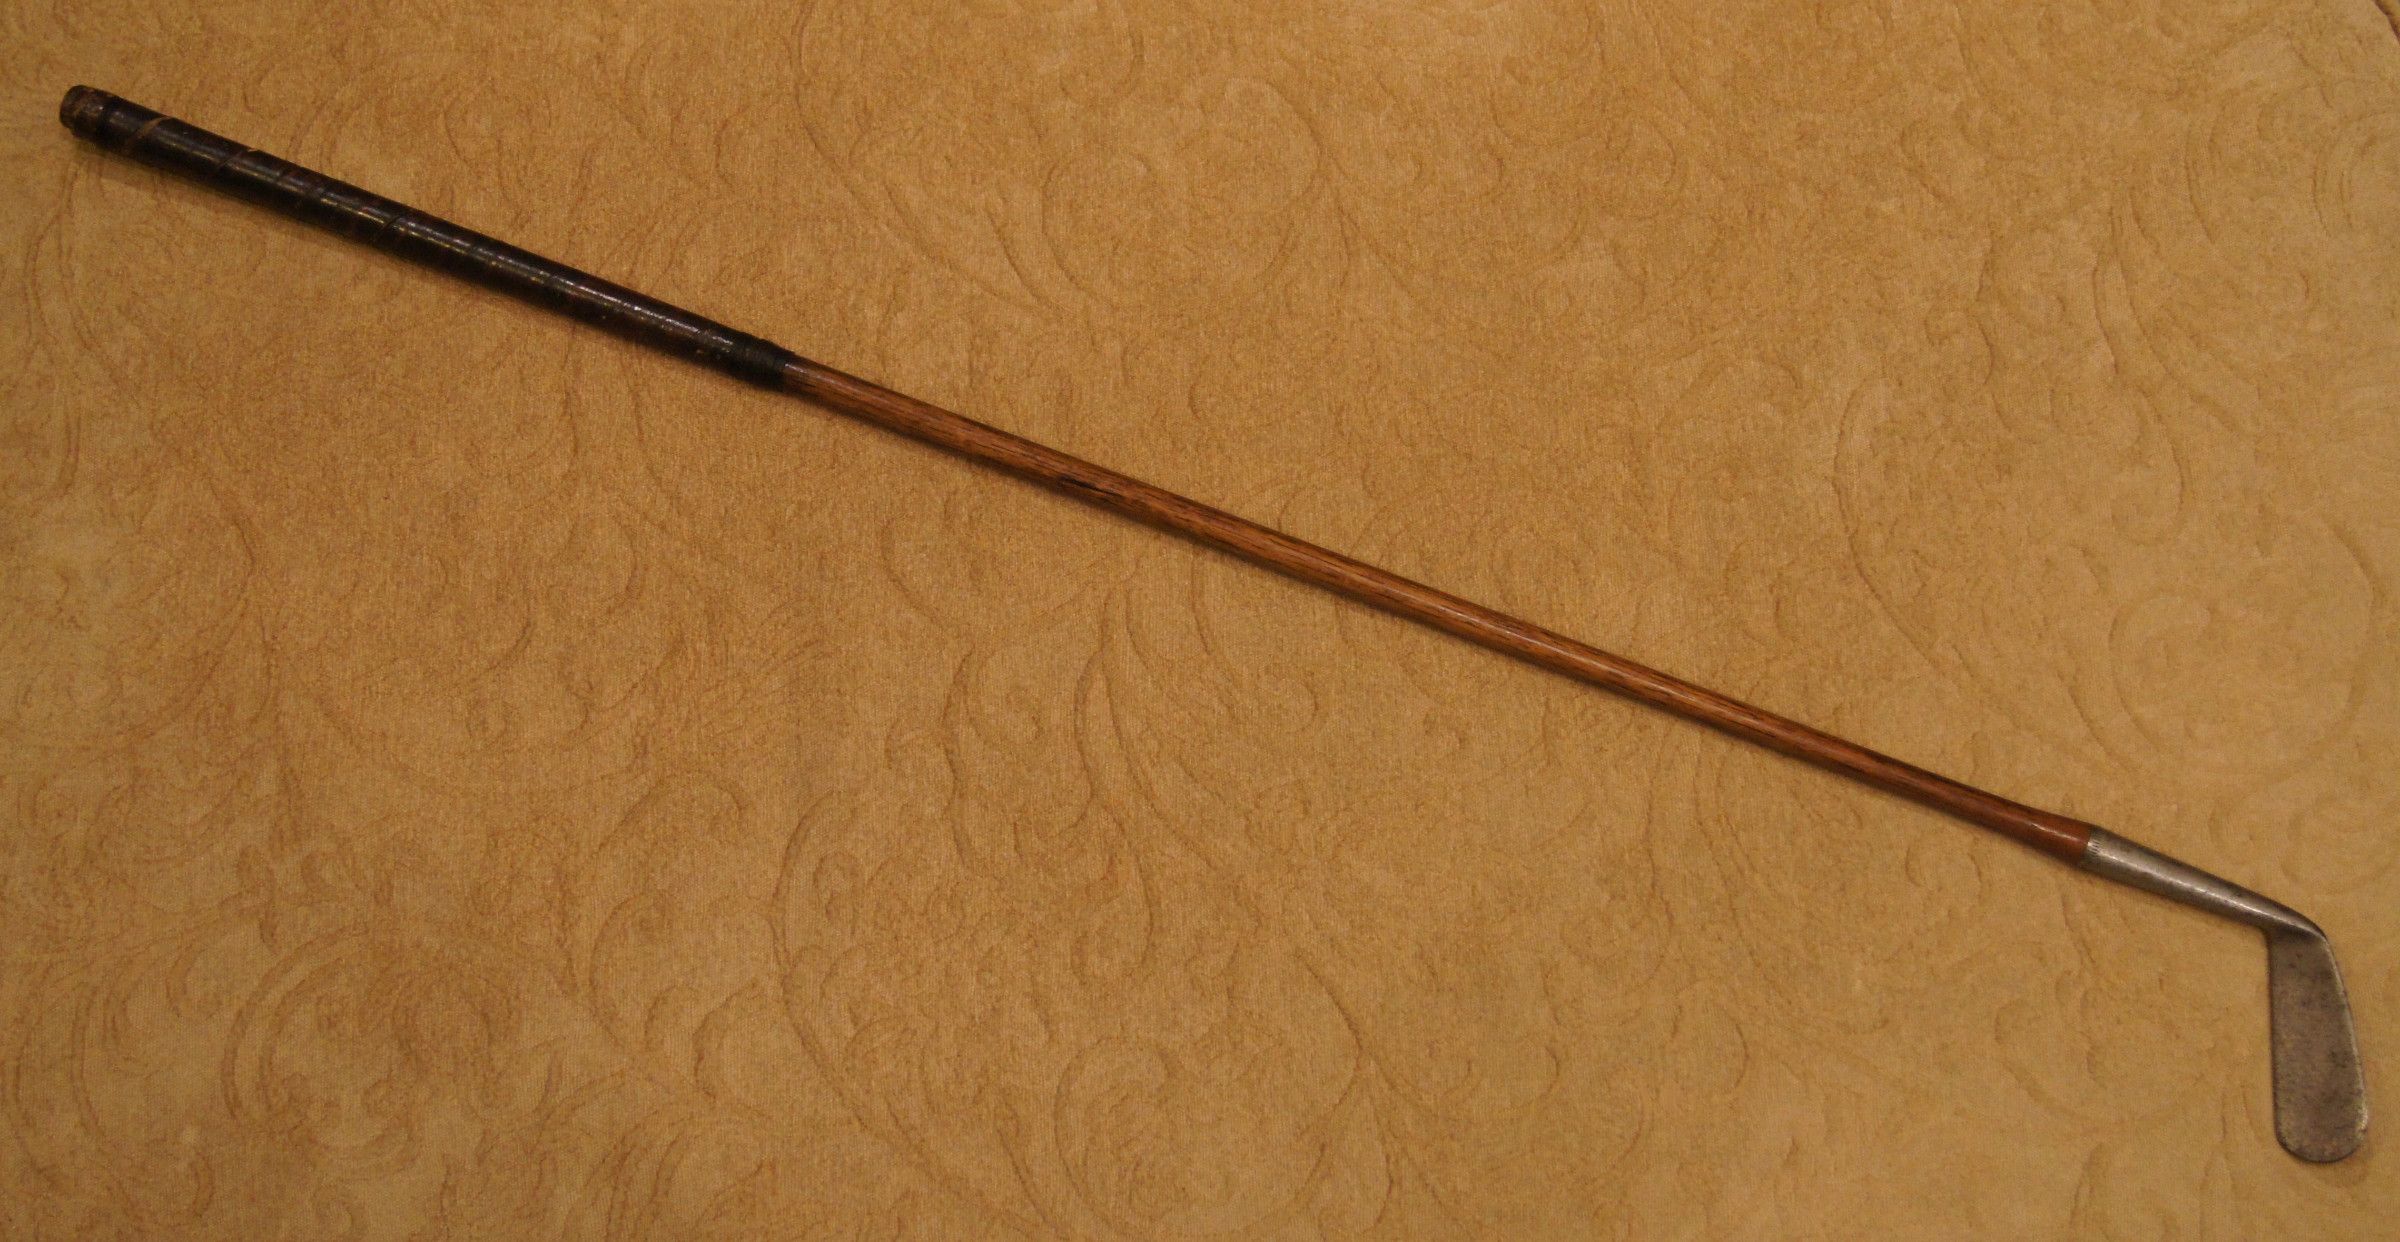 C1905 Golf Club Low Profile Smooth Face Jigger Hickory Shaft